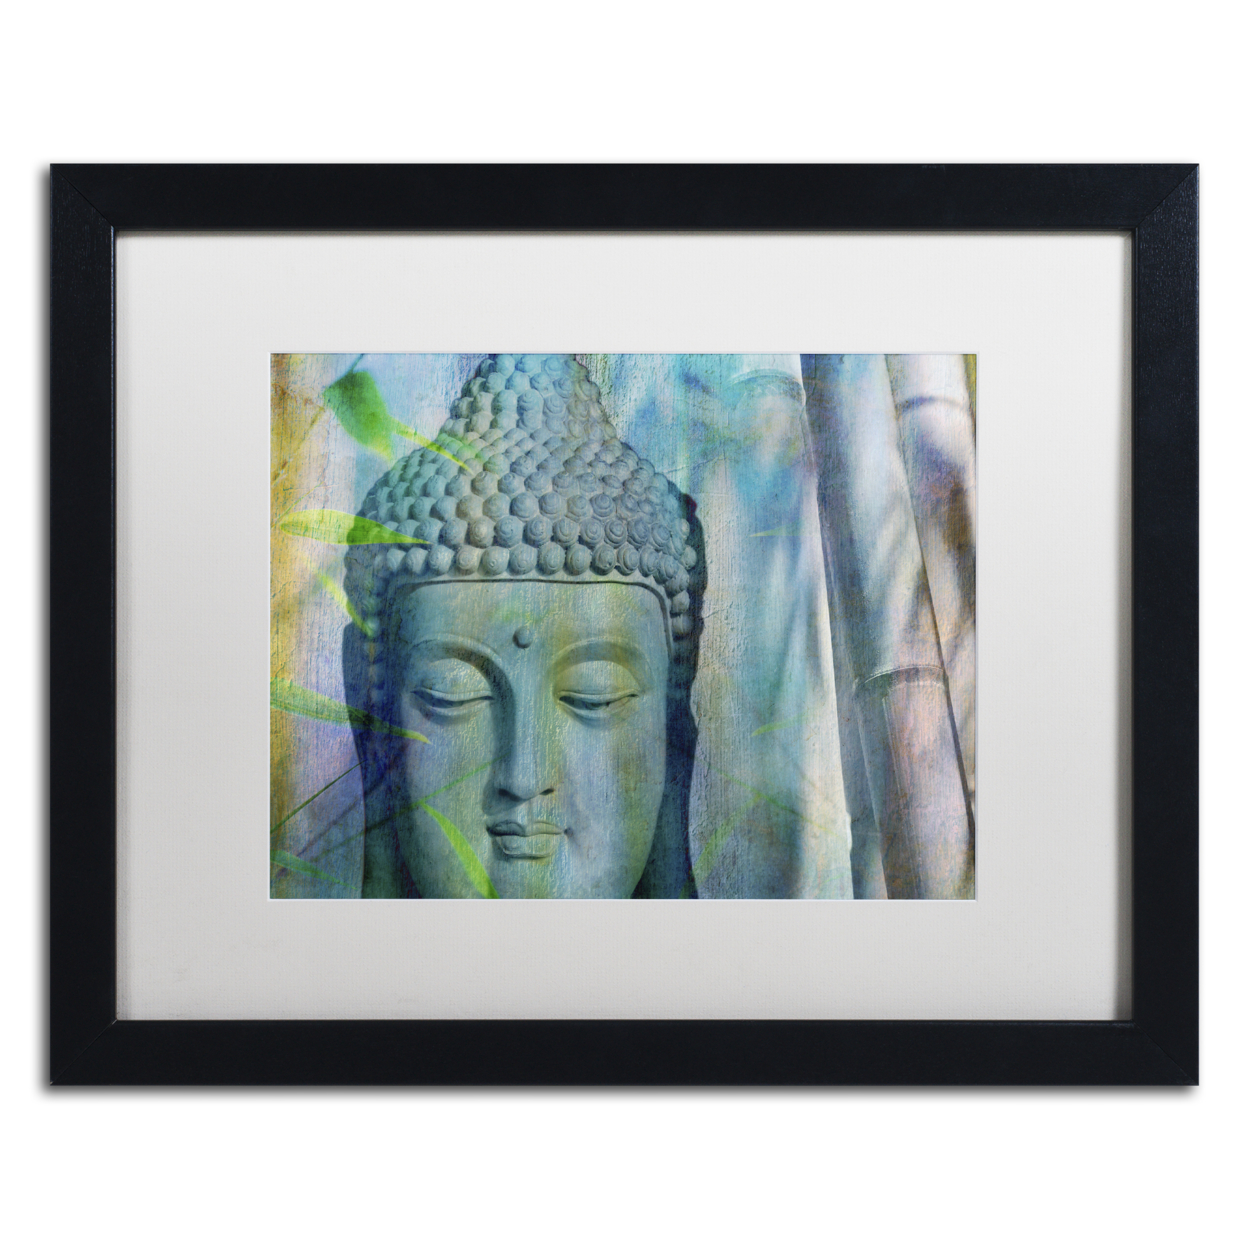 Cora Niele 'Buddha With Bamboo' Black Wooden Framed Art 18 X 22 Inches